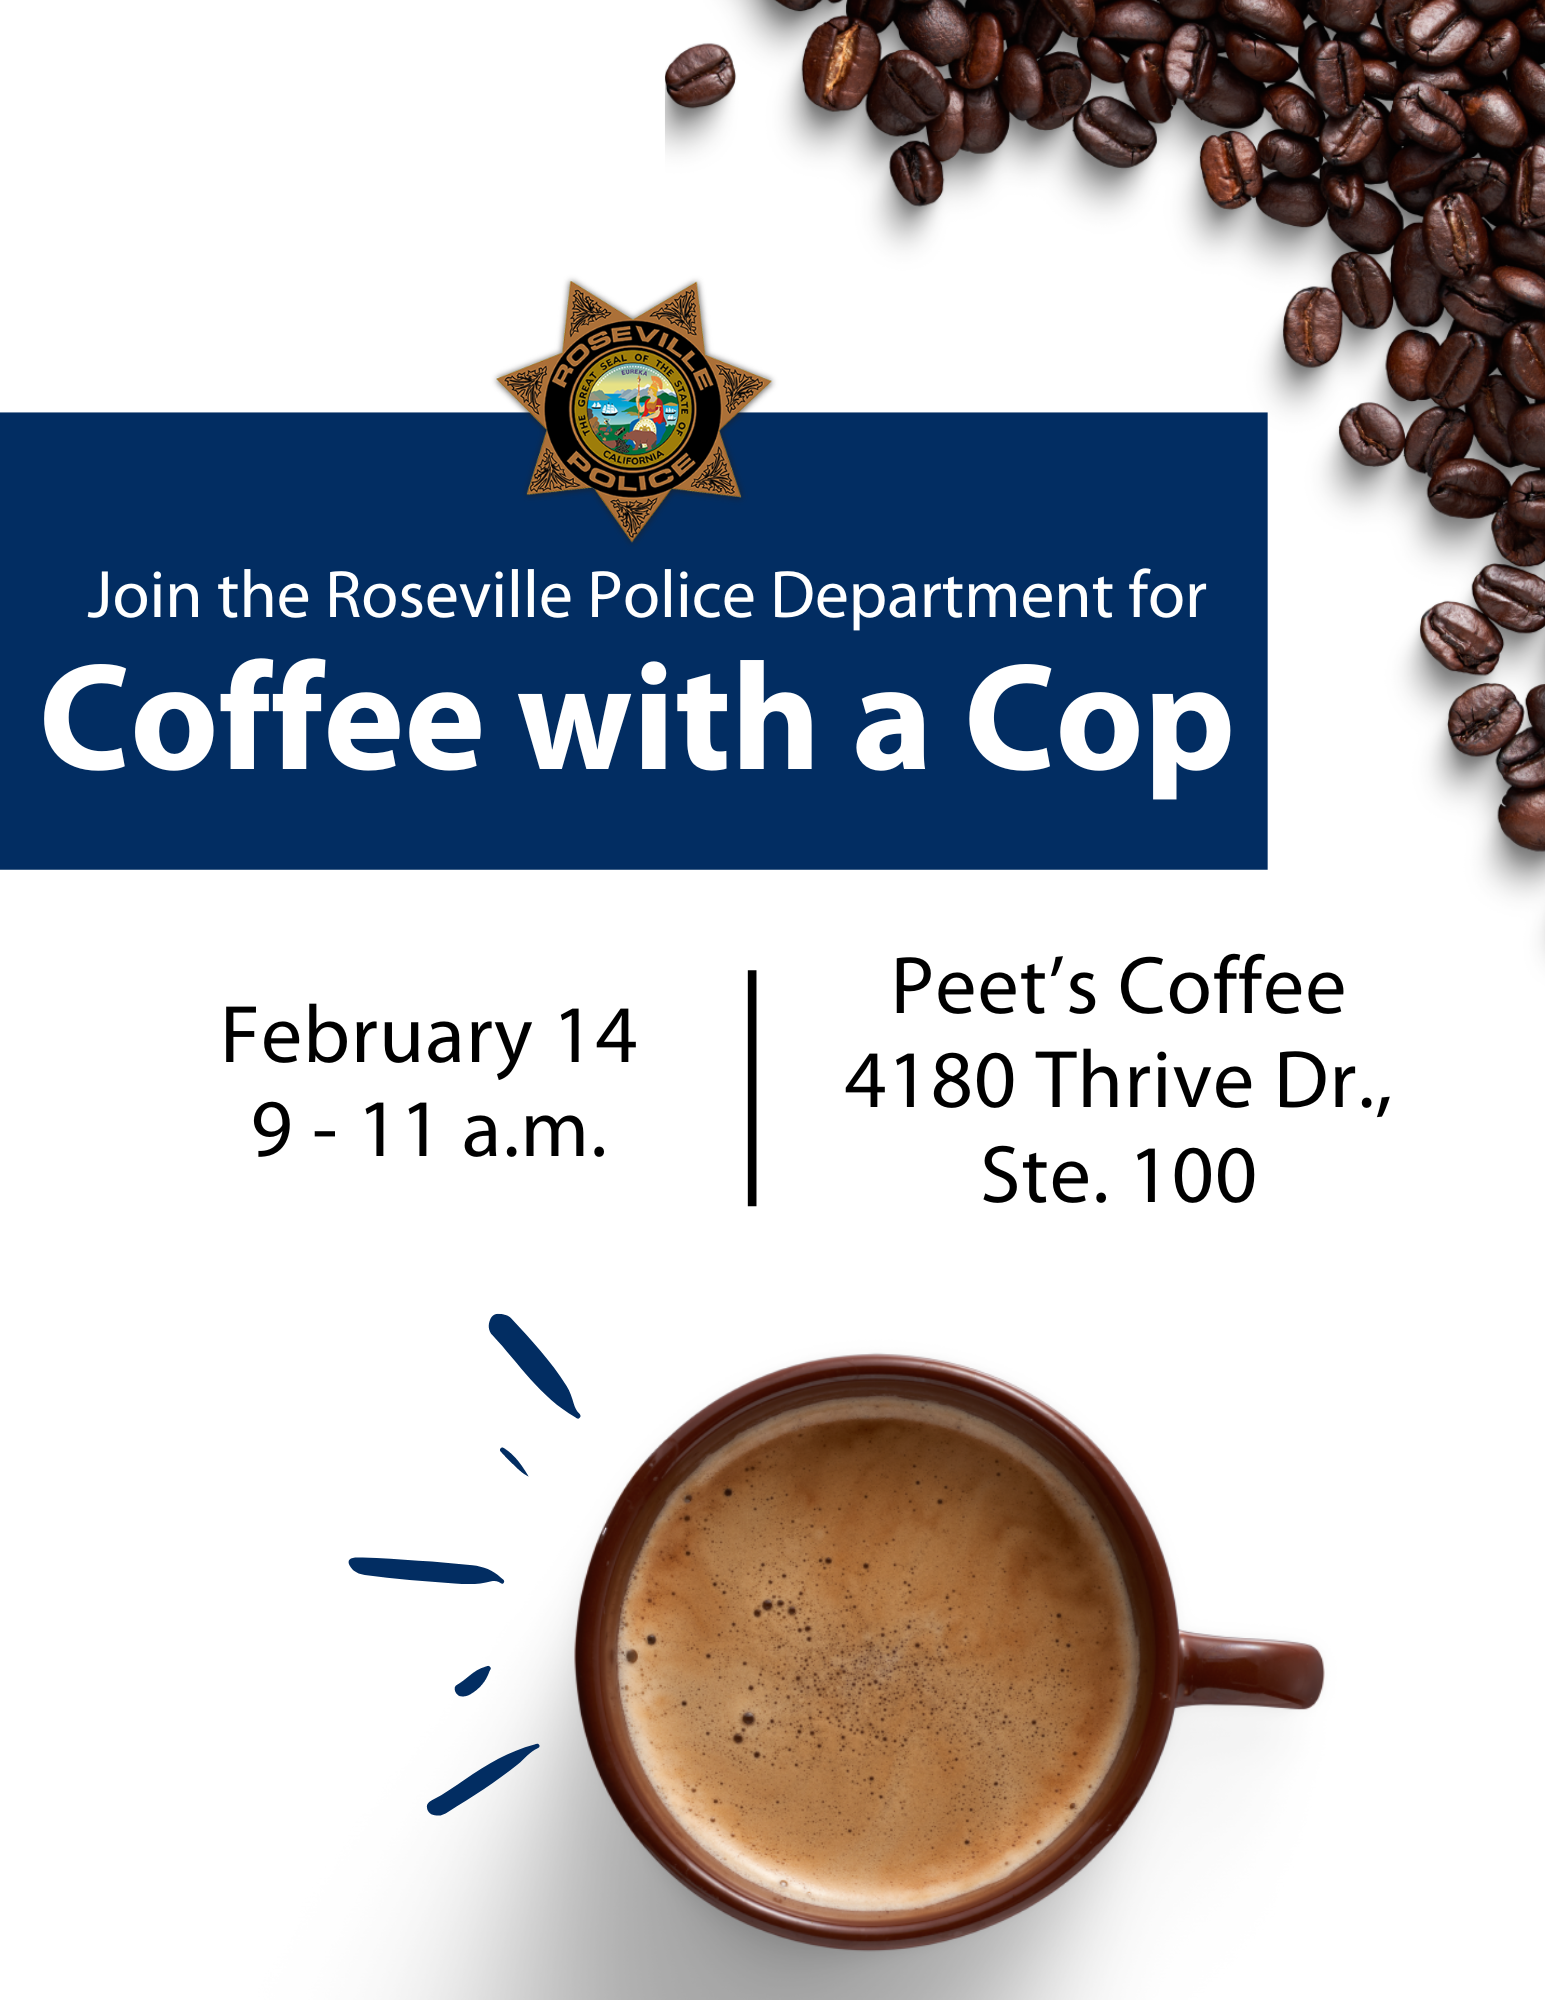 More information about "Coffee with a Cop"